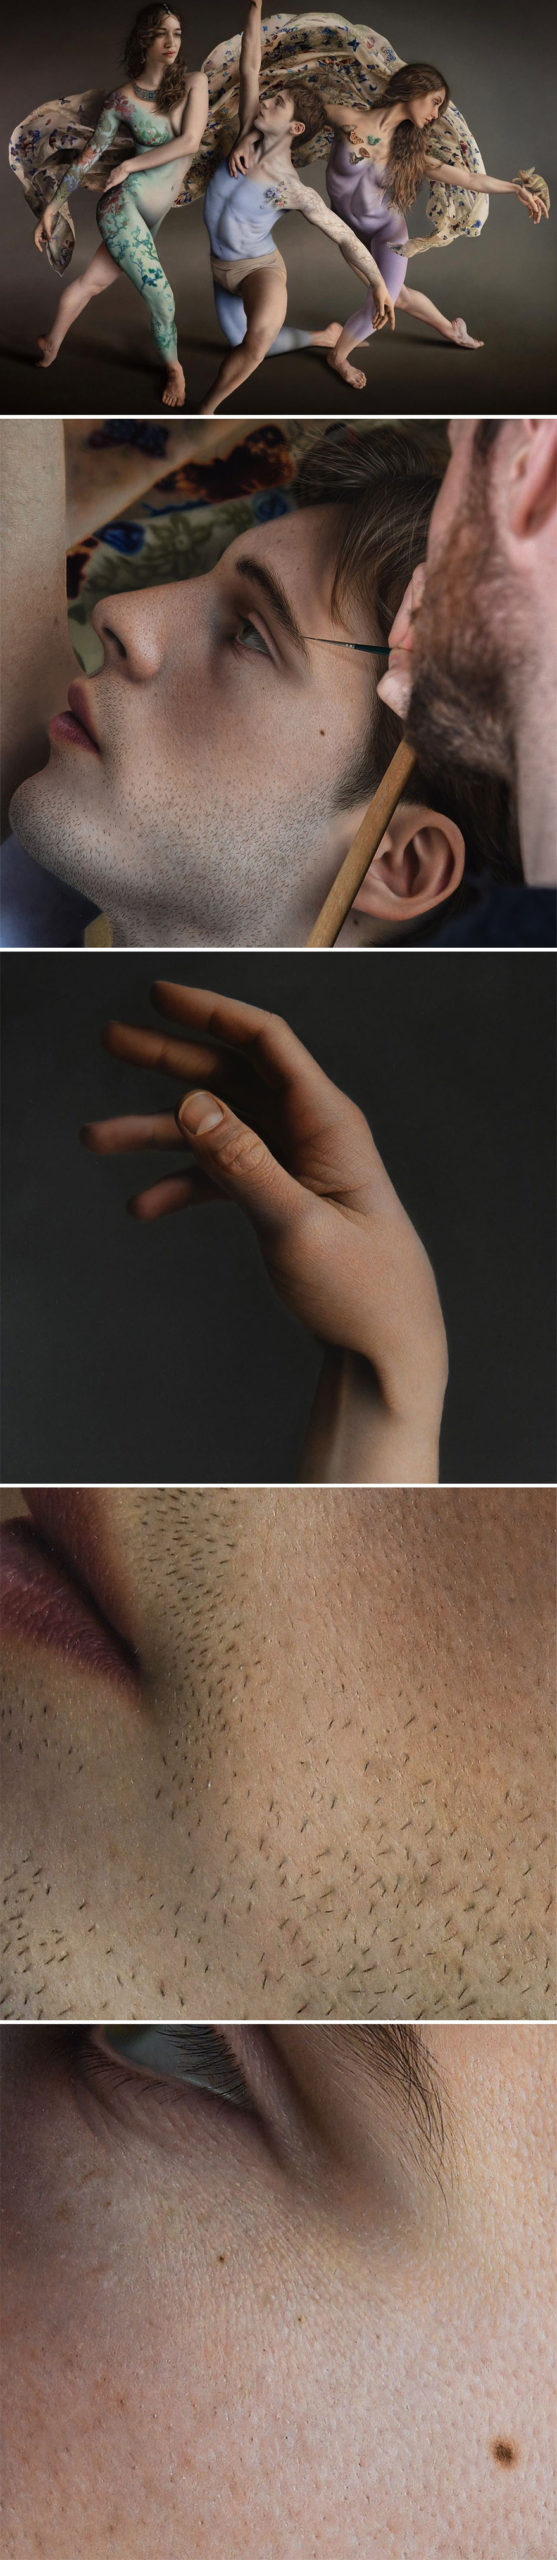 Marco Grassi's amazing realistic paintings, a fusion of surrealism and surrealism revealed New Pics 6613b1b91f53e 880